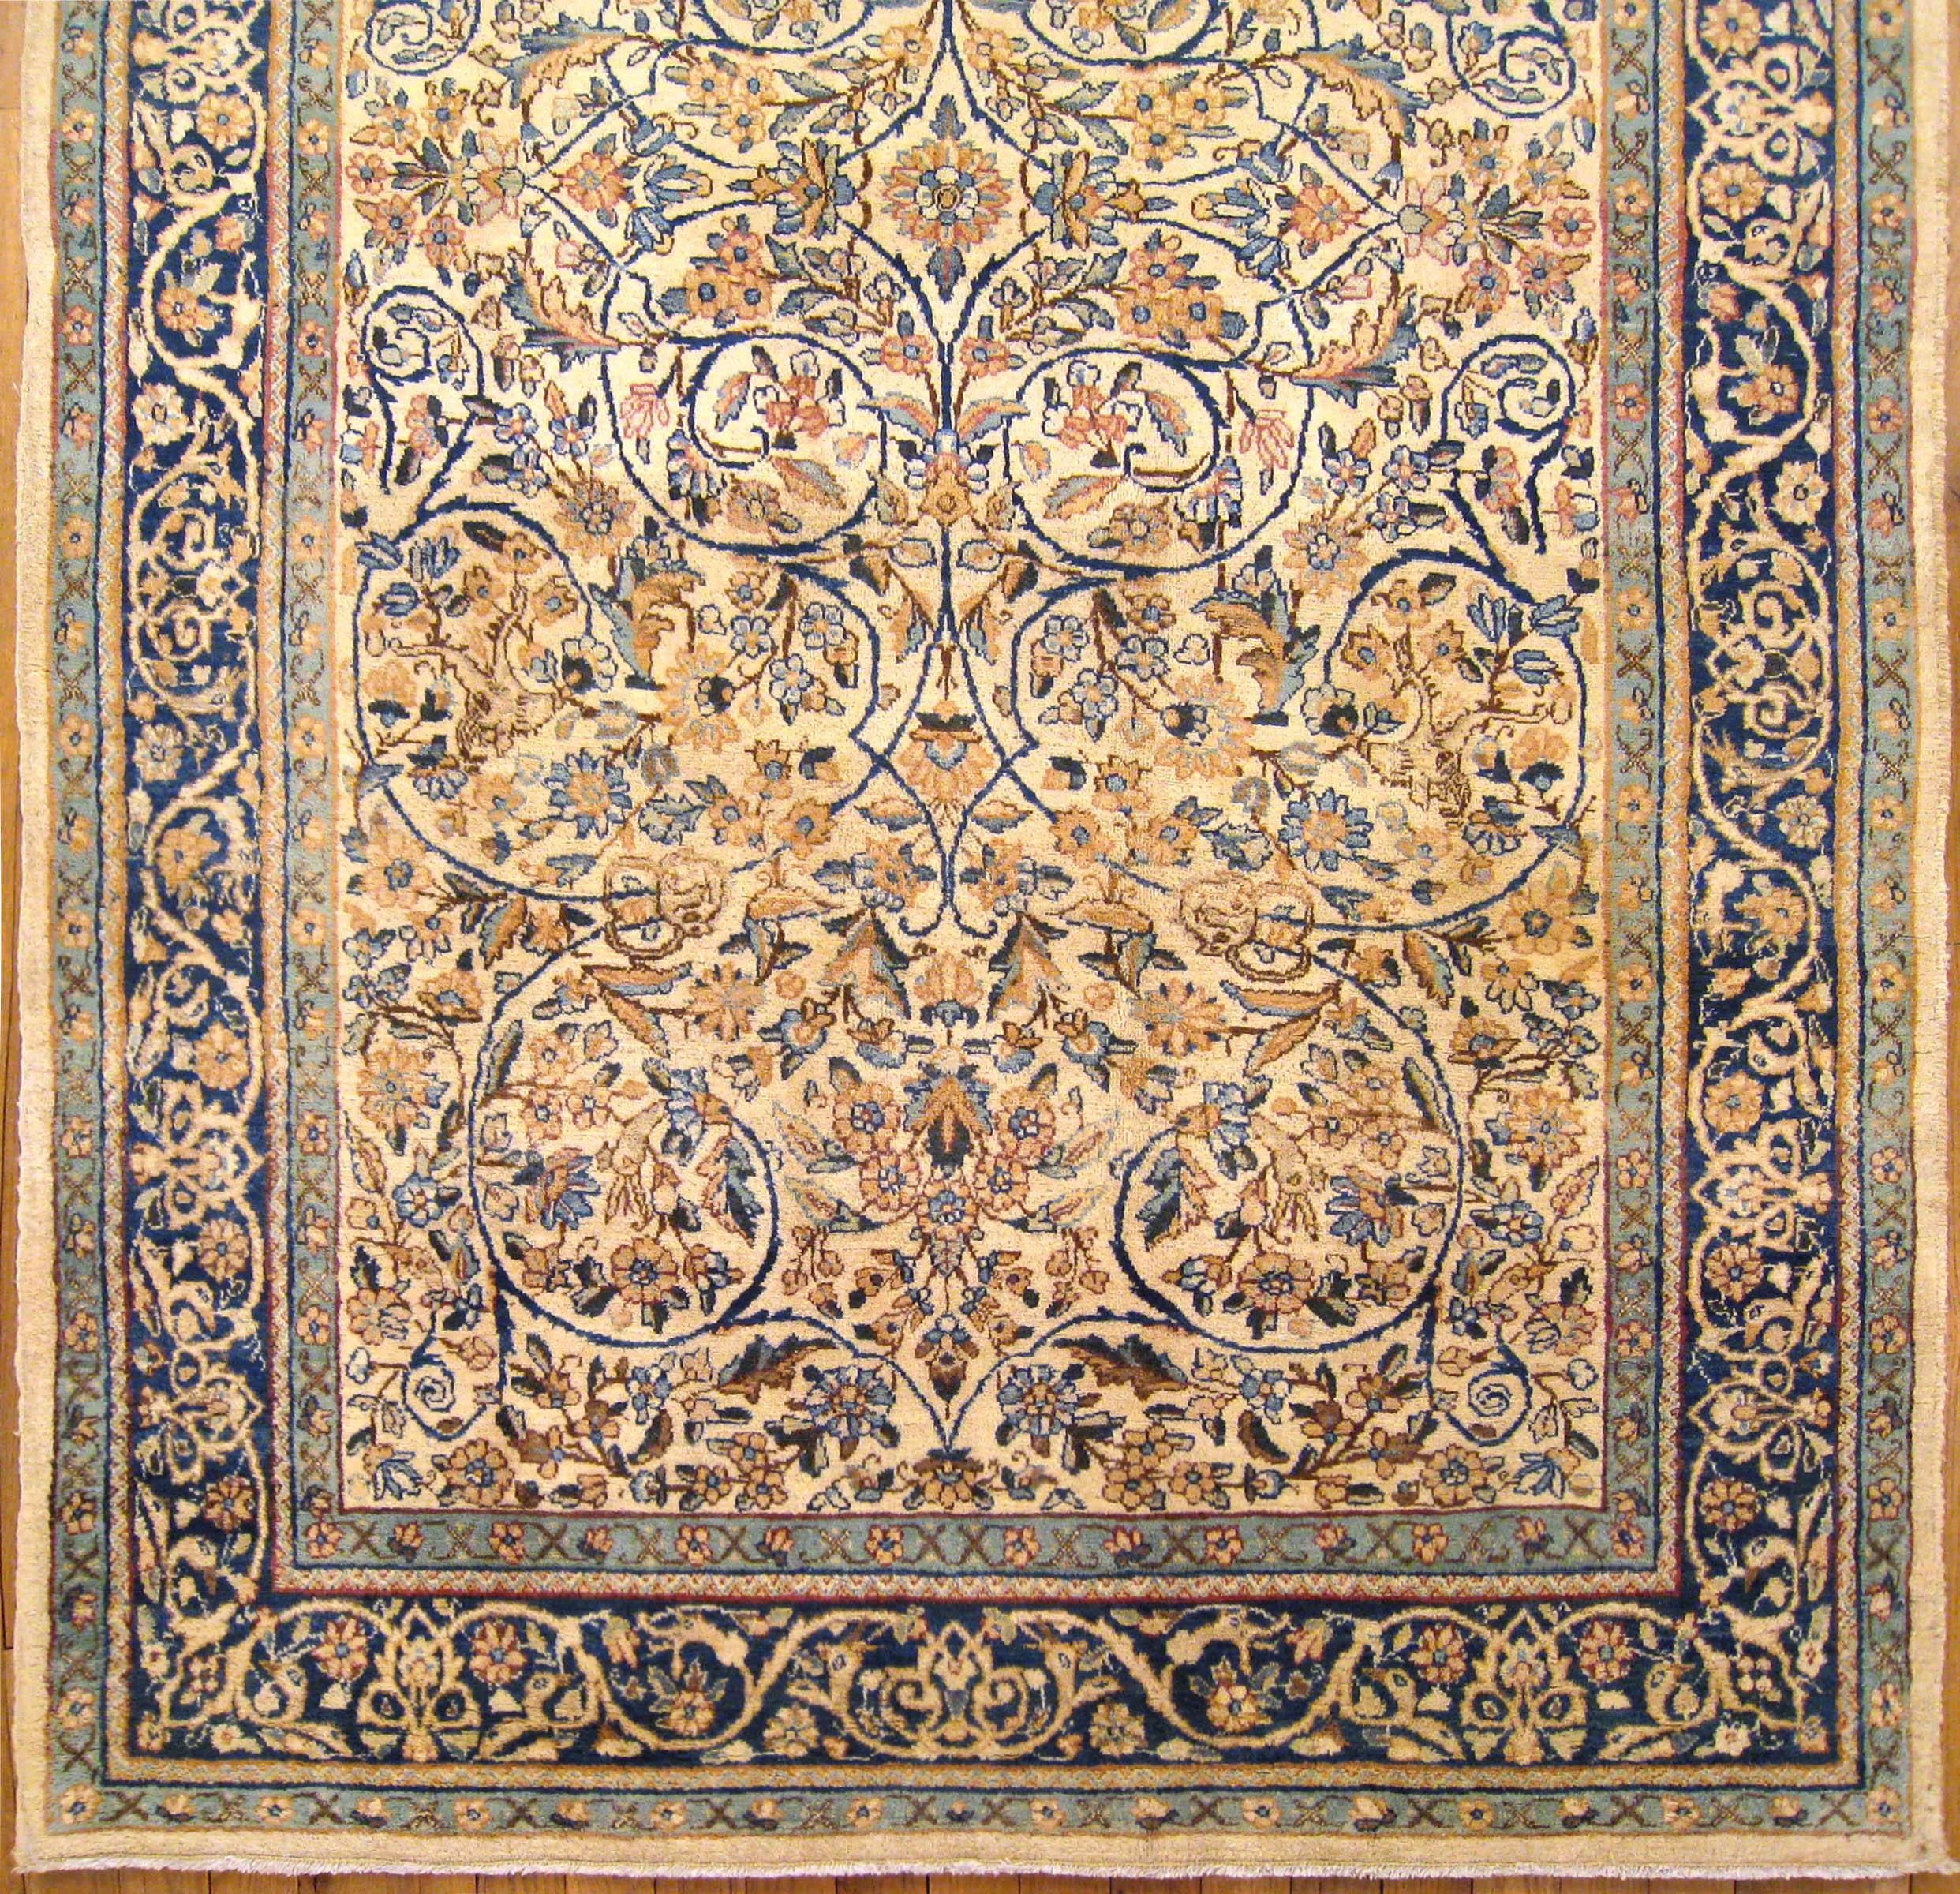 Hand-Knotted Antique Persian Kerman Carpet, in Small Size, with Ivory Field and Floral Design